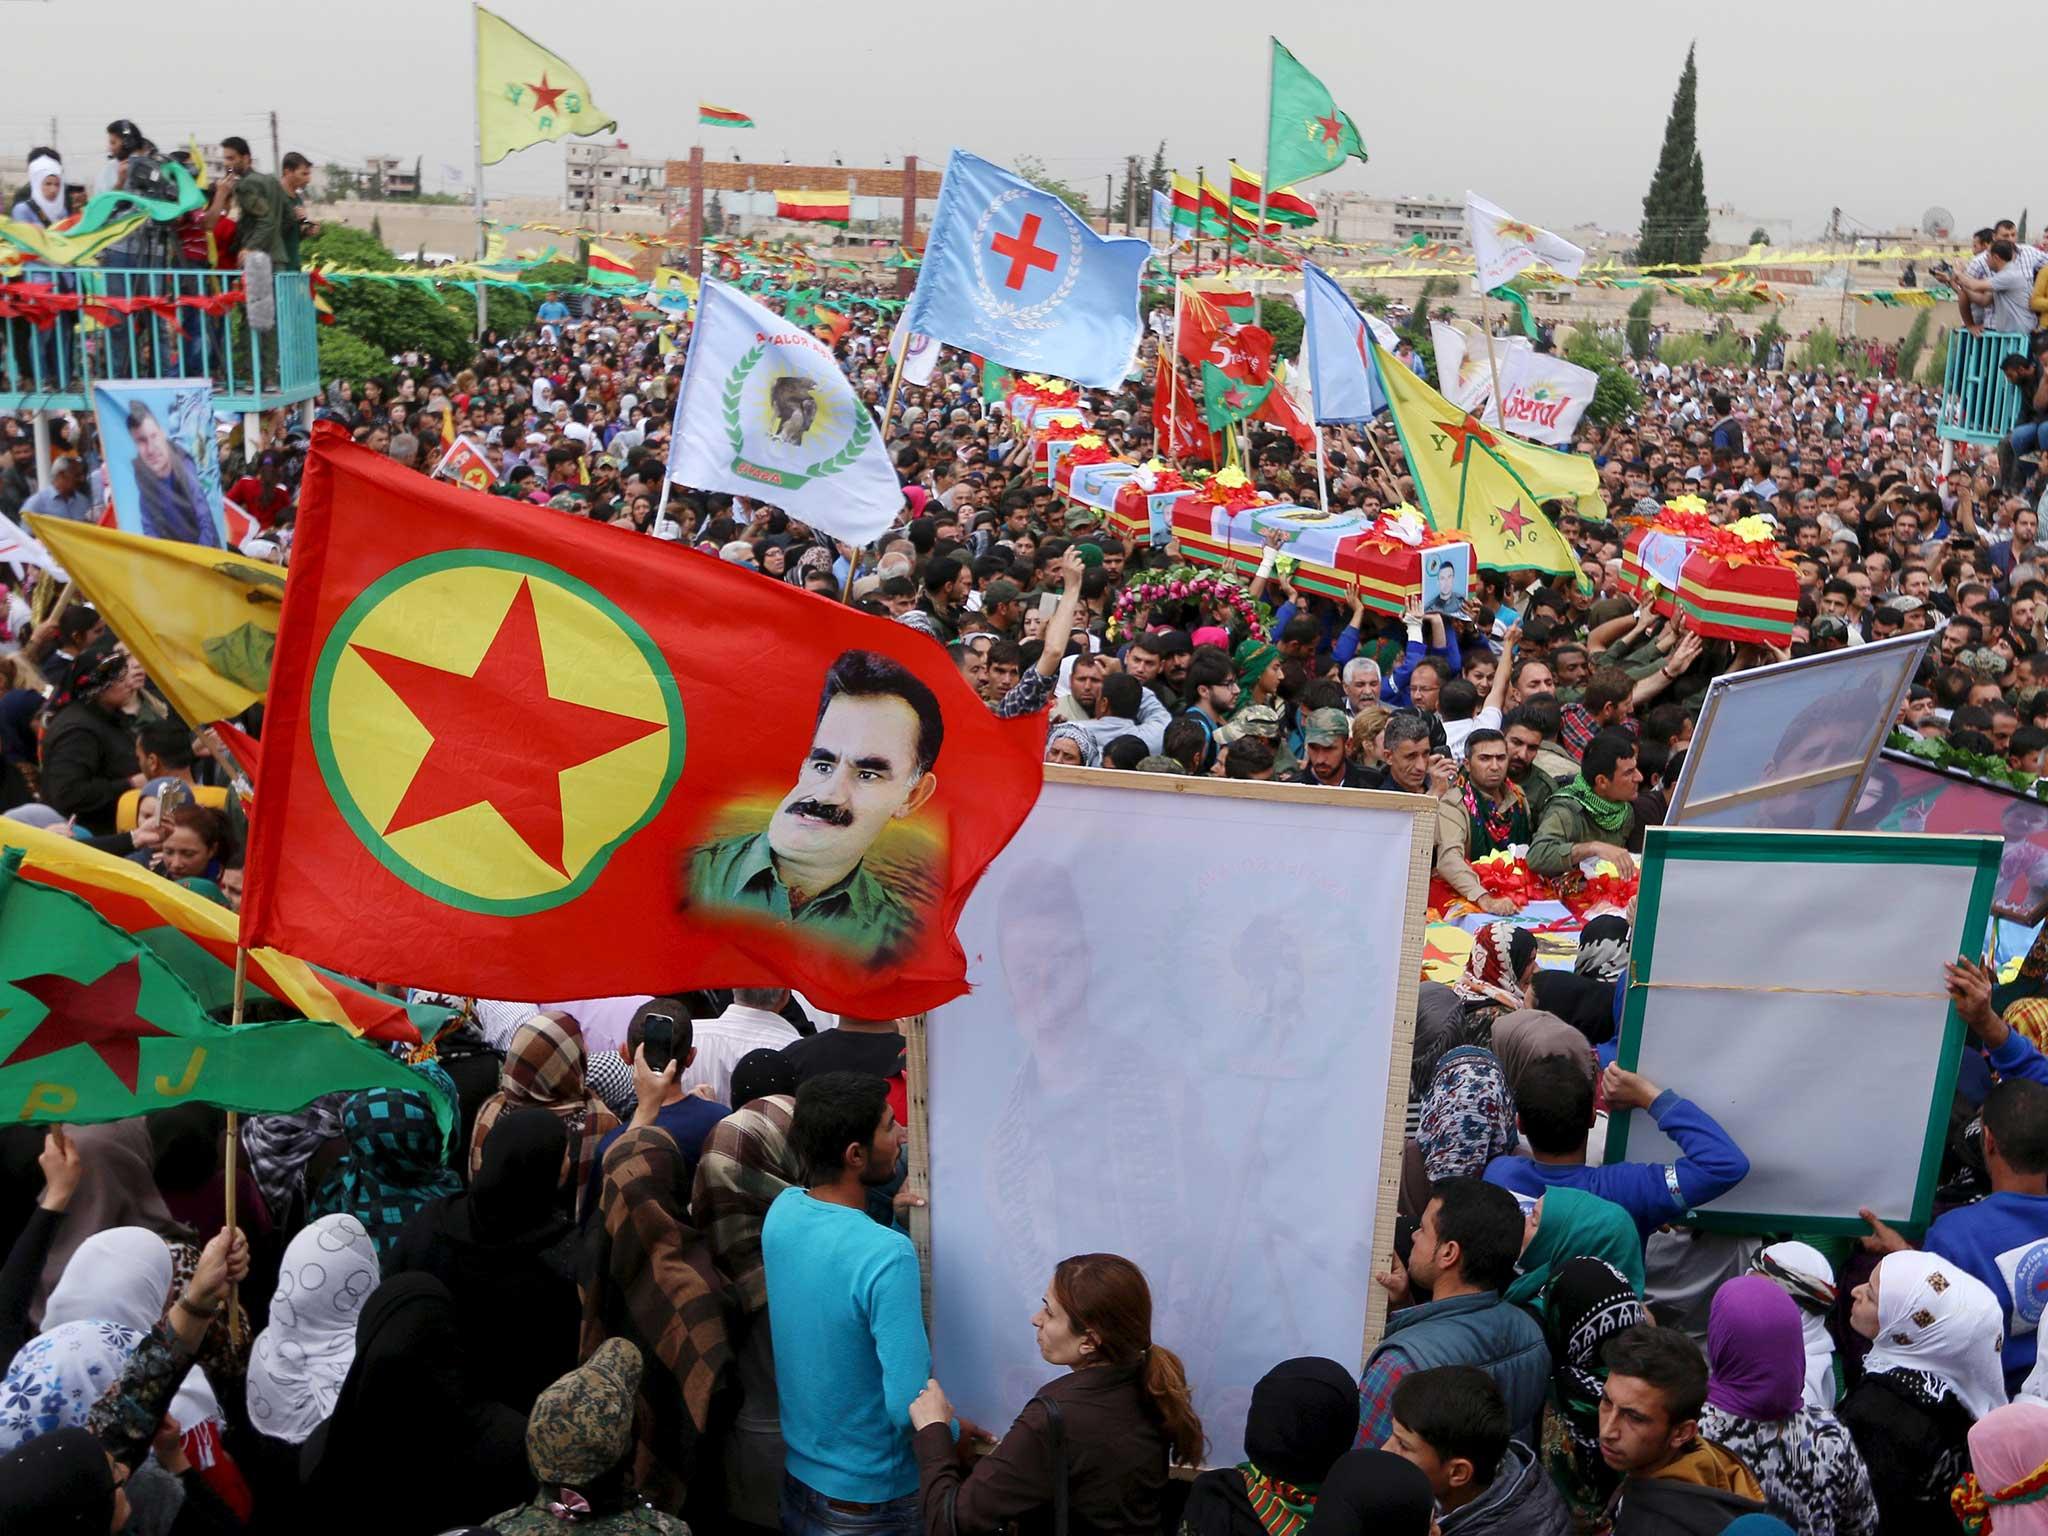 Supporters of the PKK, whom Turkey and the EU consider a terrorist group at a rally. It was allegedly involvement with this group that led to the 1994 murder of Mehmet Kaygisiz